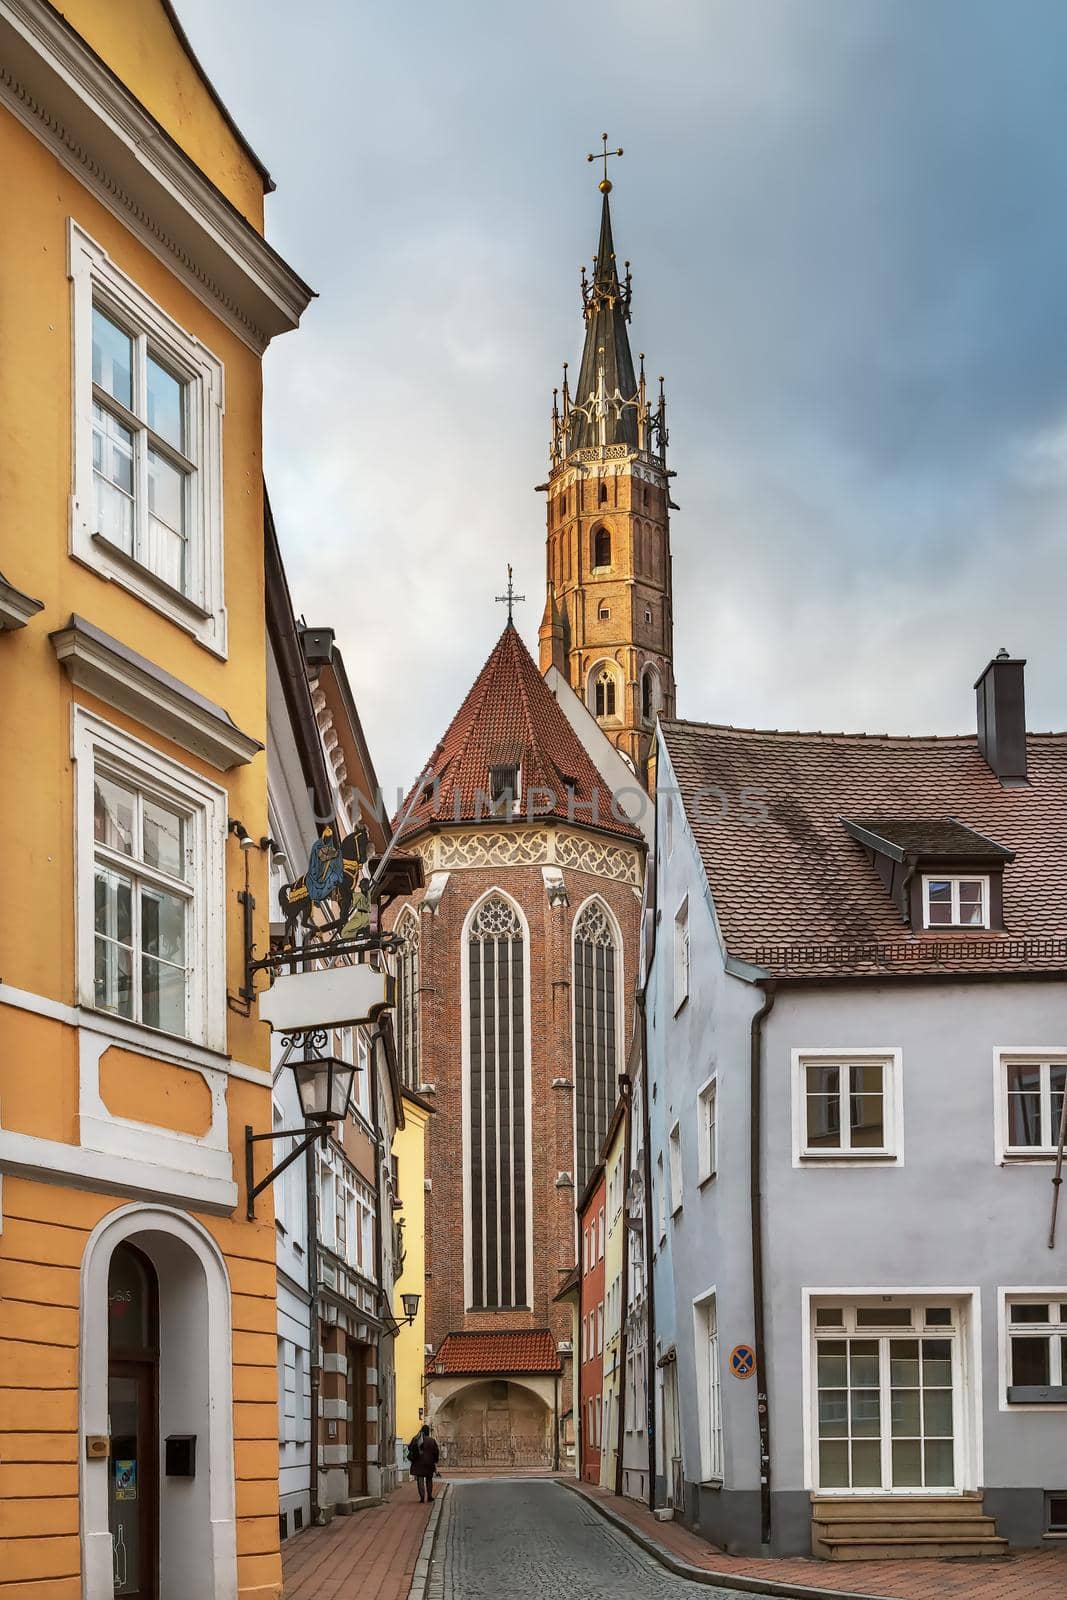 View of St. Martin Church in Landshut downtown, Germany